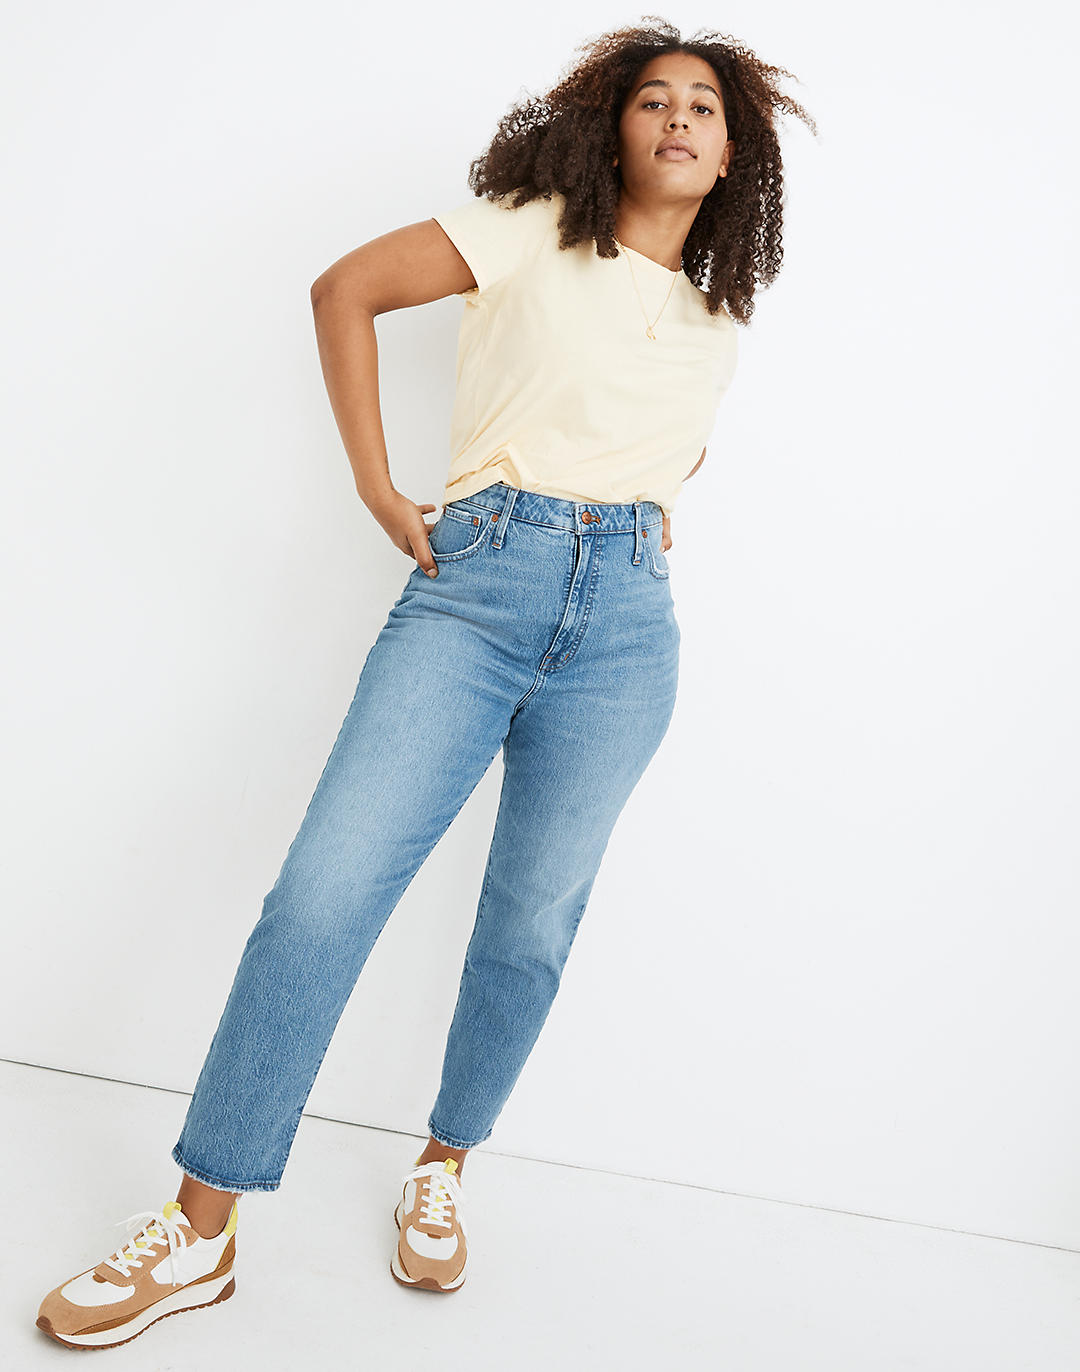 appeal regulate sketch Women's Classic Straight Jeans in Nearwood Wash | Madewell